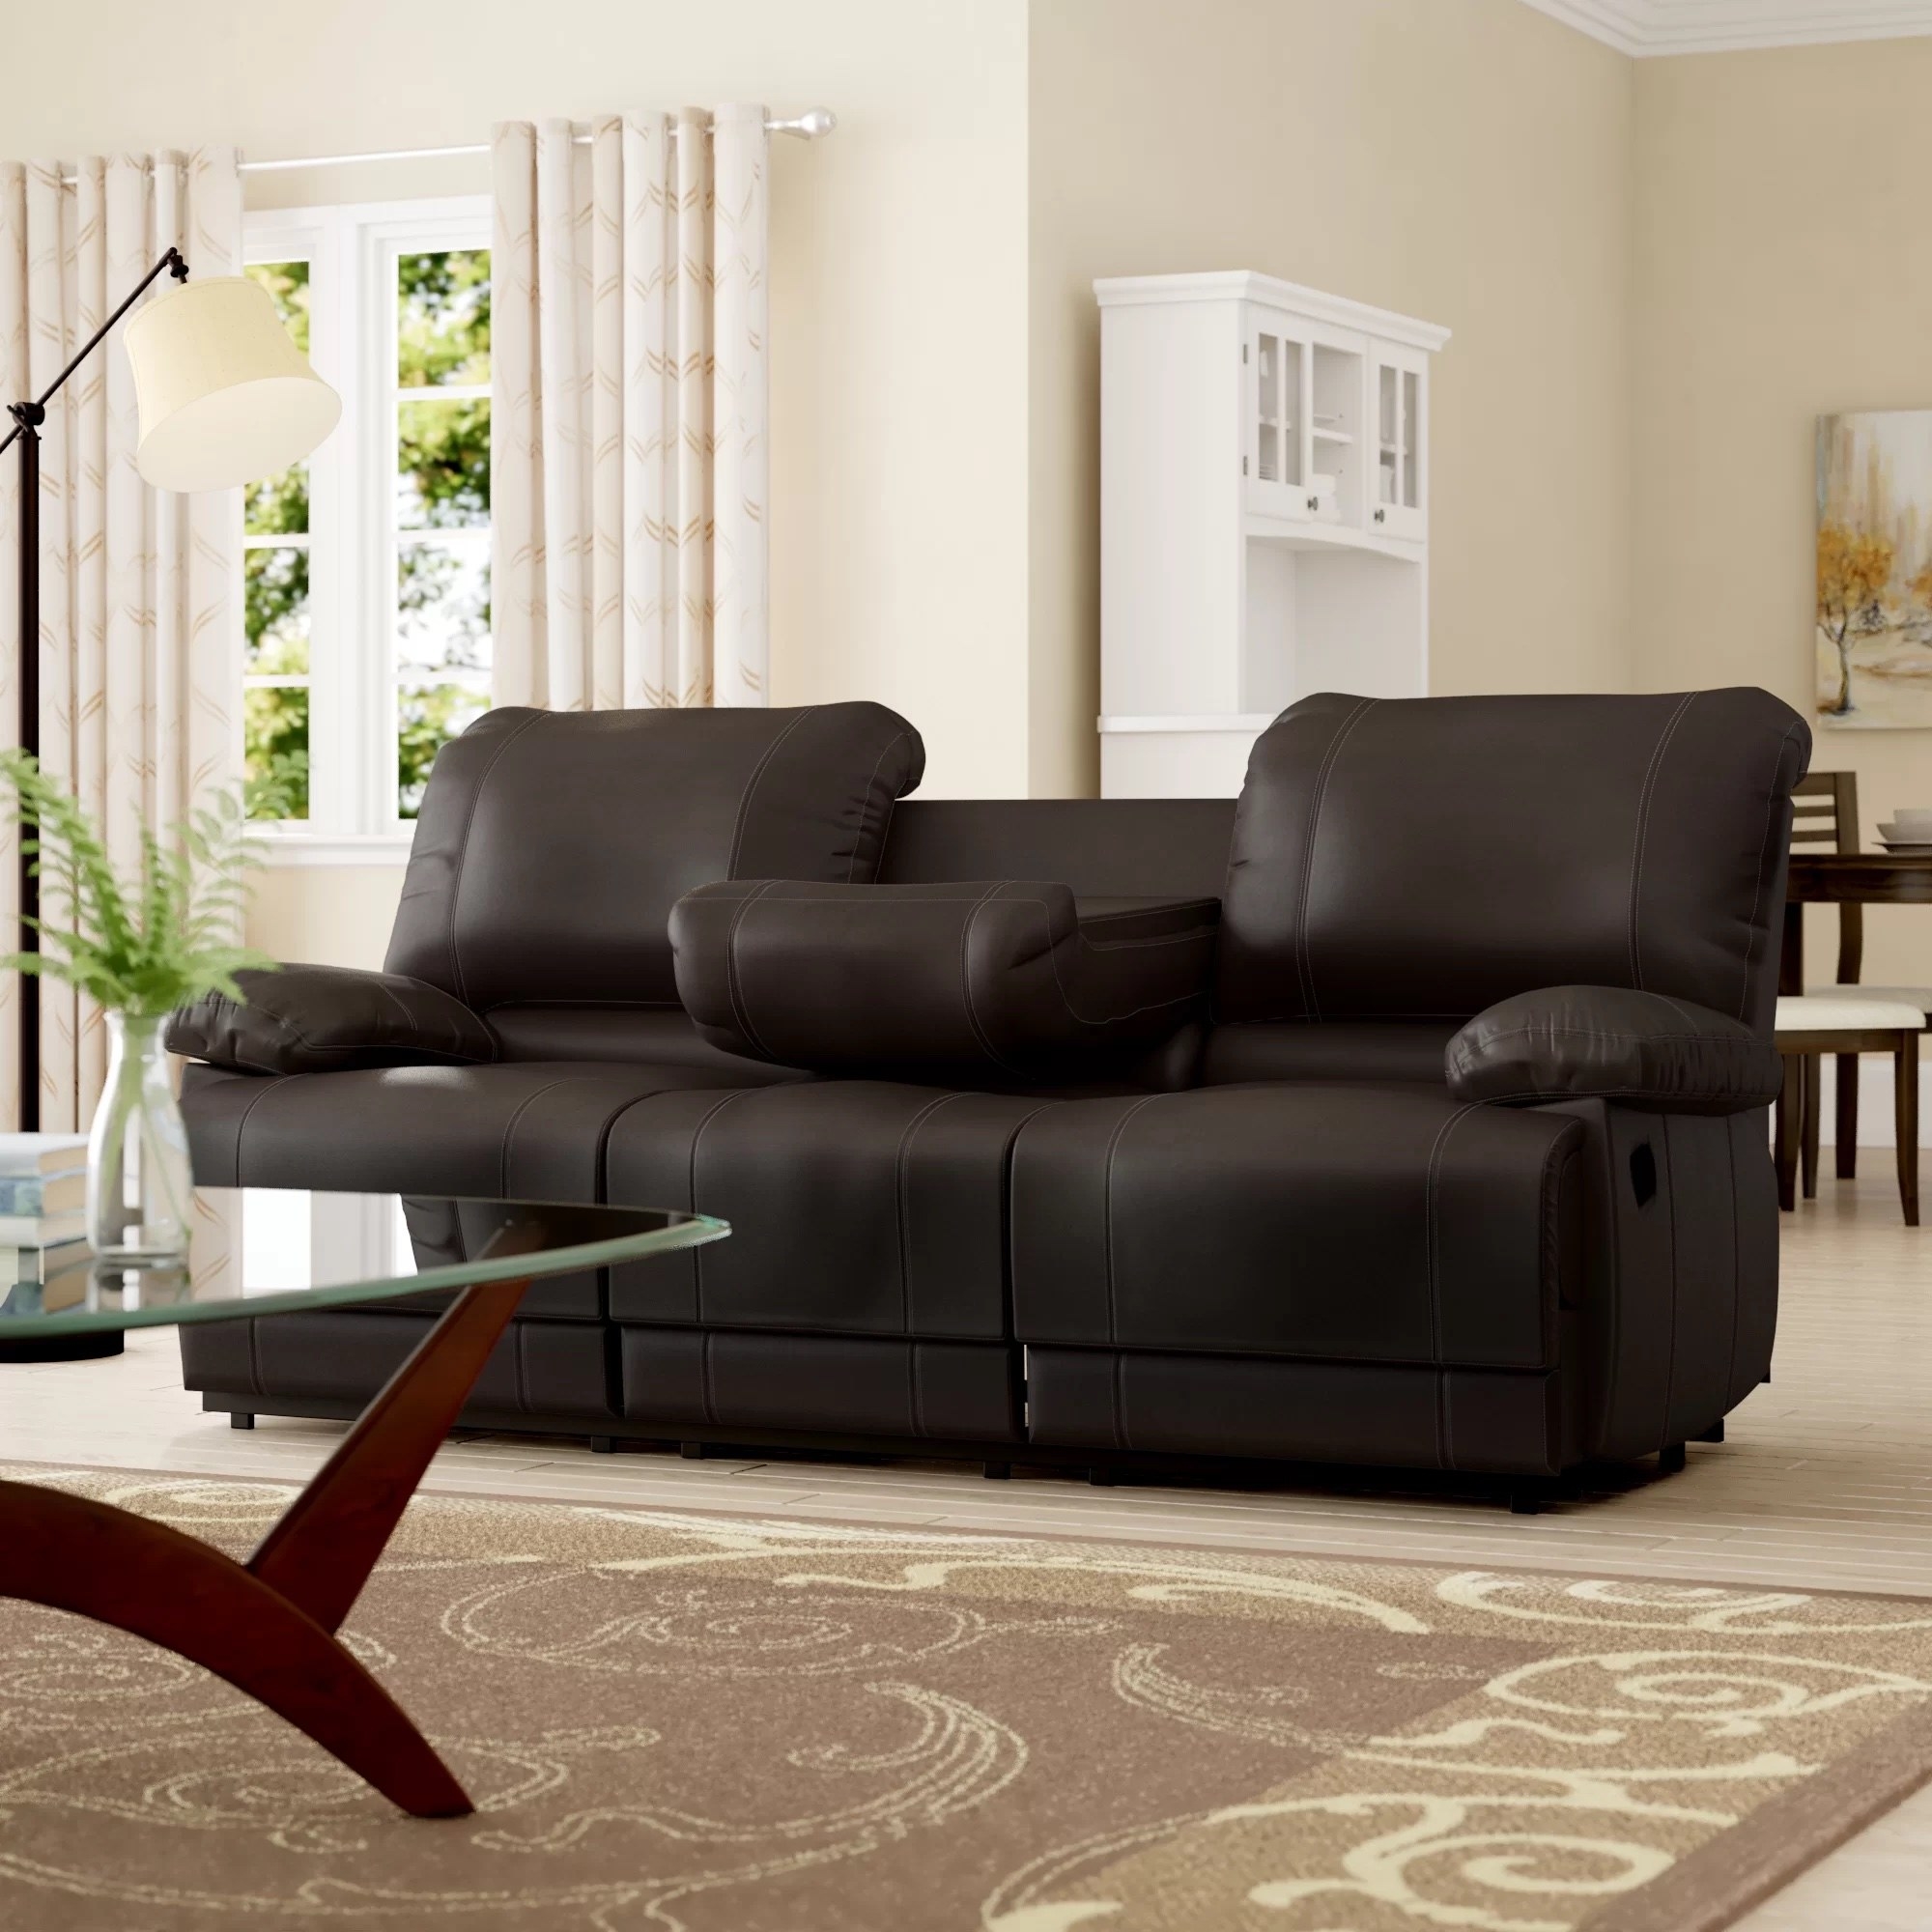 a black leather sofa in a living room